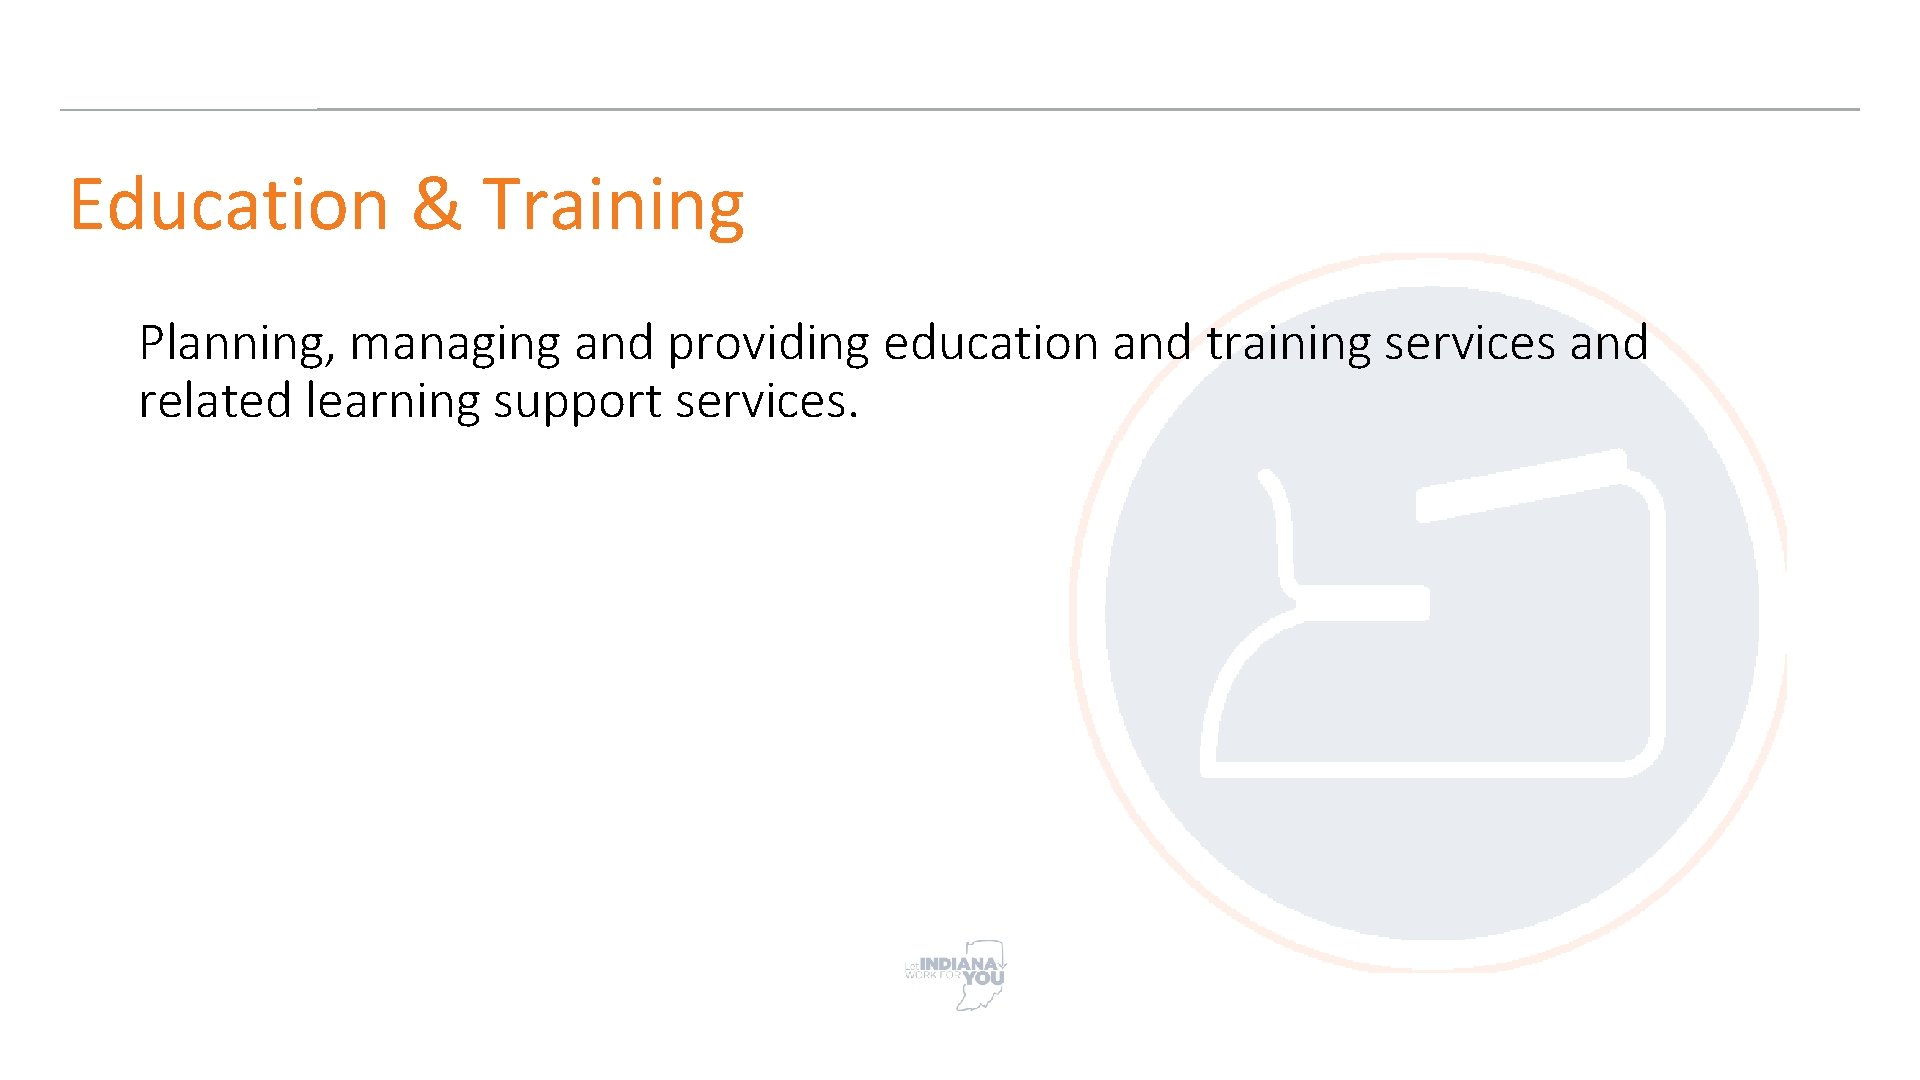 Education & Training Planning, managing and providing education and training services and related learning